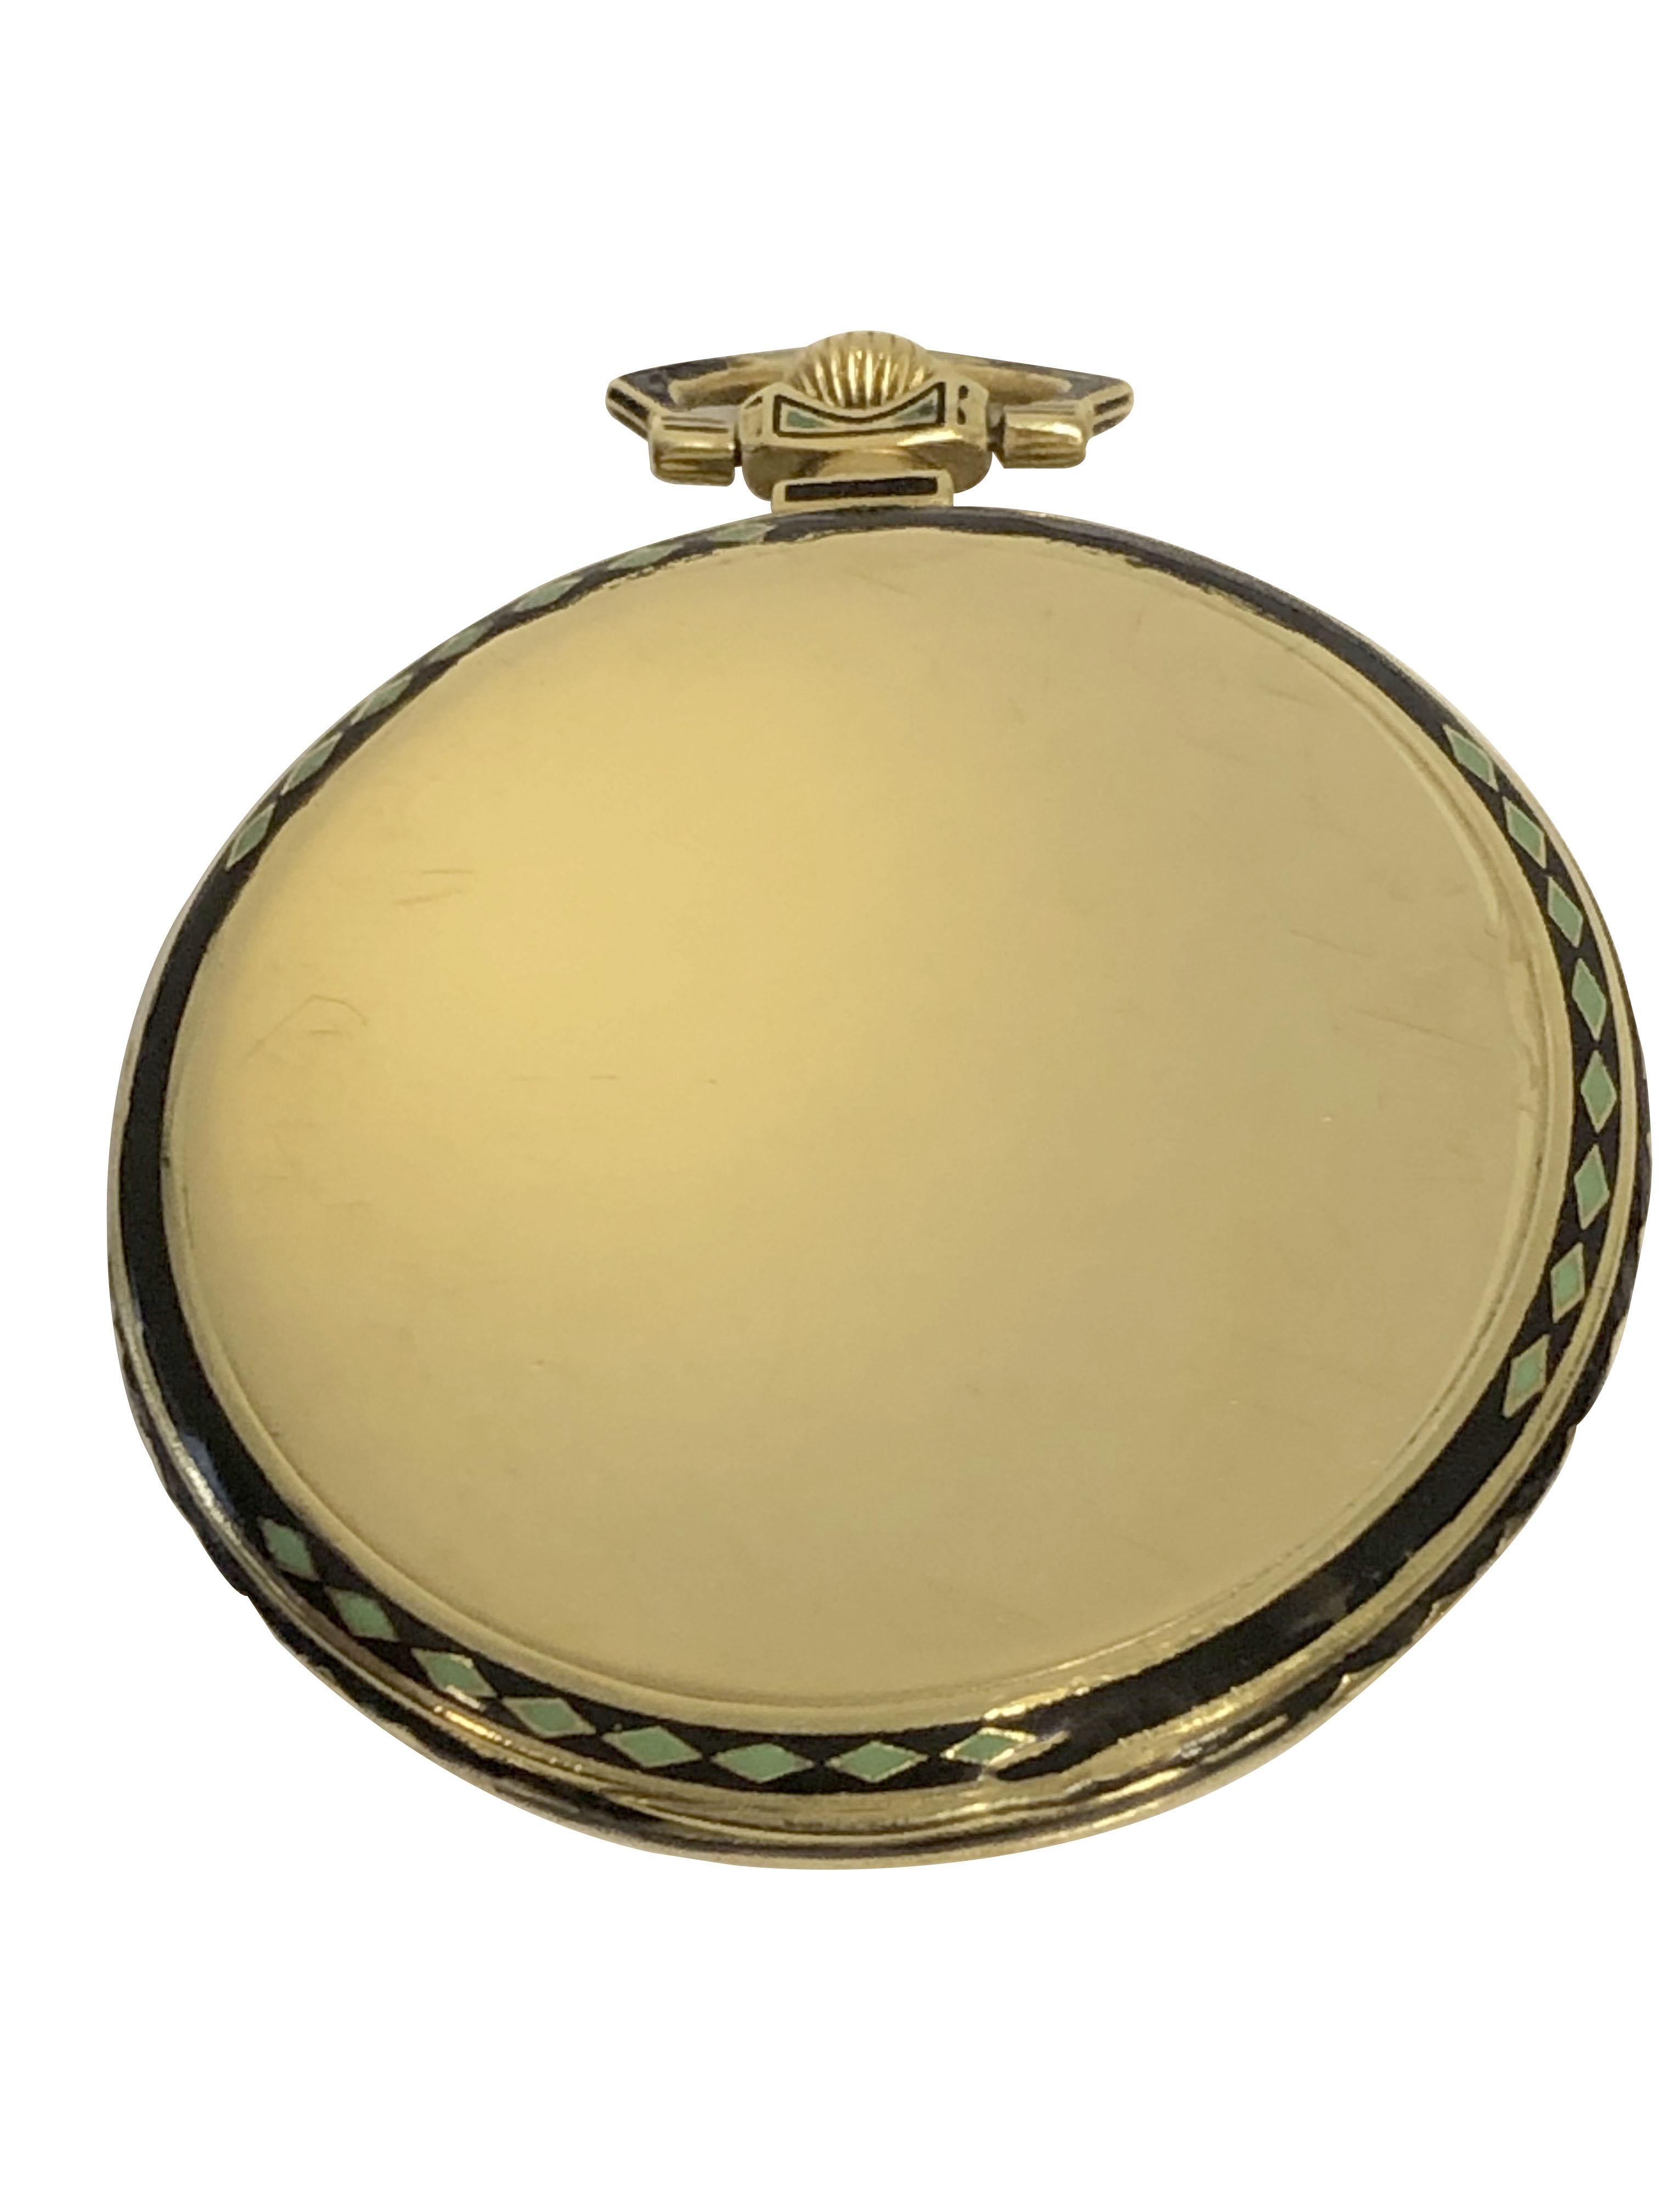 Circa Late 1920's Patek Philippe Pocket Watch, 45 M.M 18k Yellow Gold 3 piece case with Black and Green Enamel, 18 Jewel Nickle Lever, mechanical, manual wind movement, Silver satin dial with raised Gold markers and 